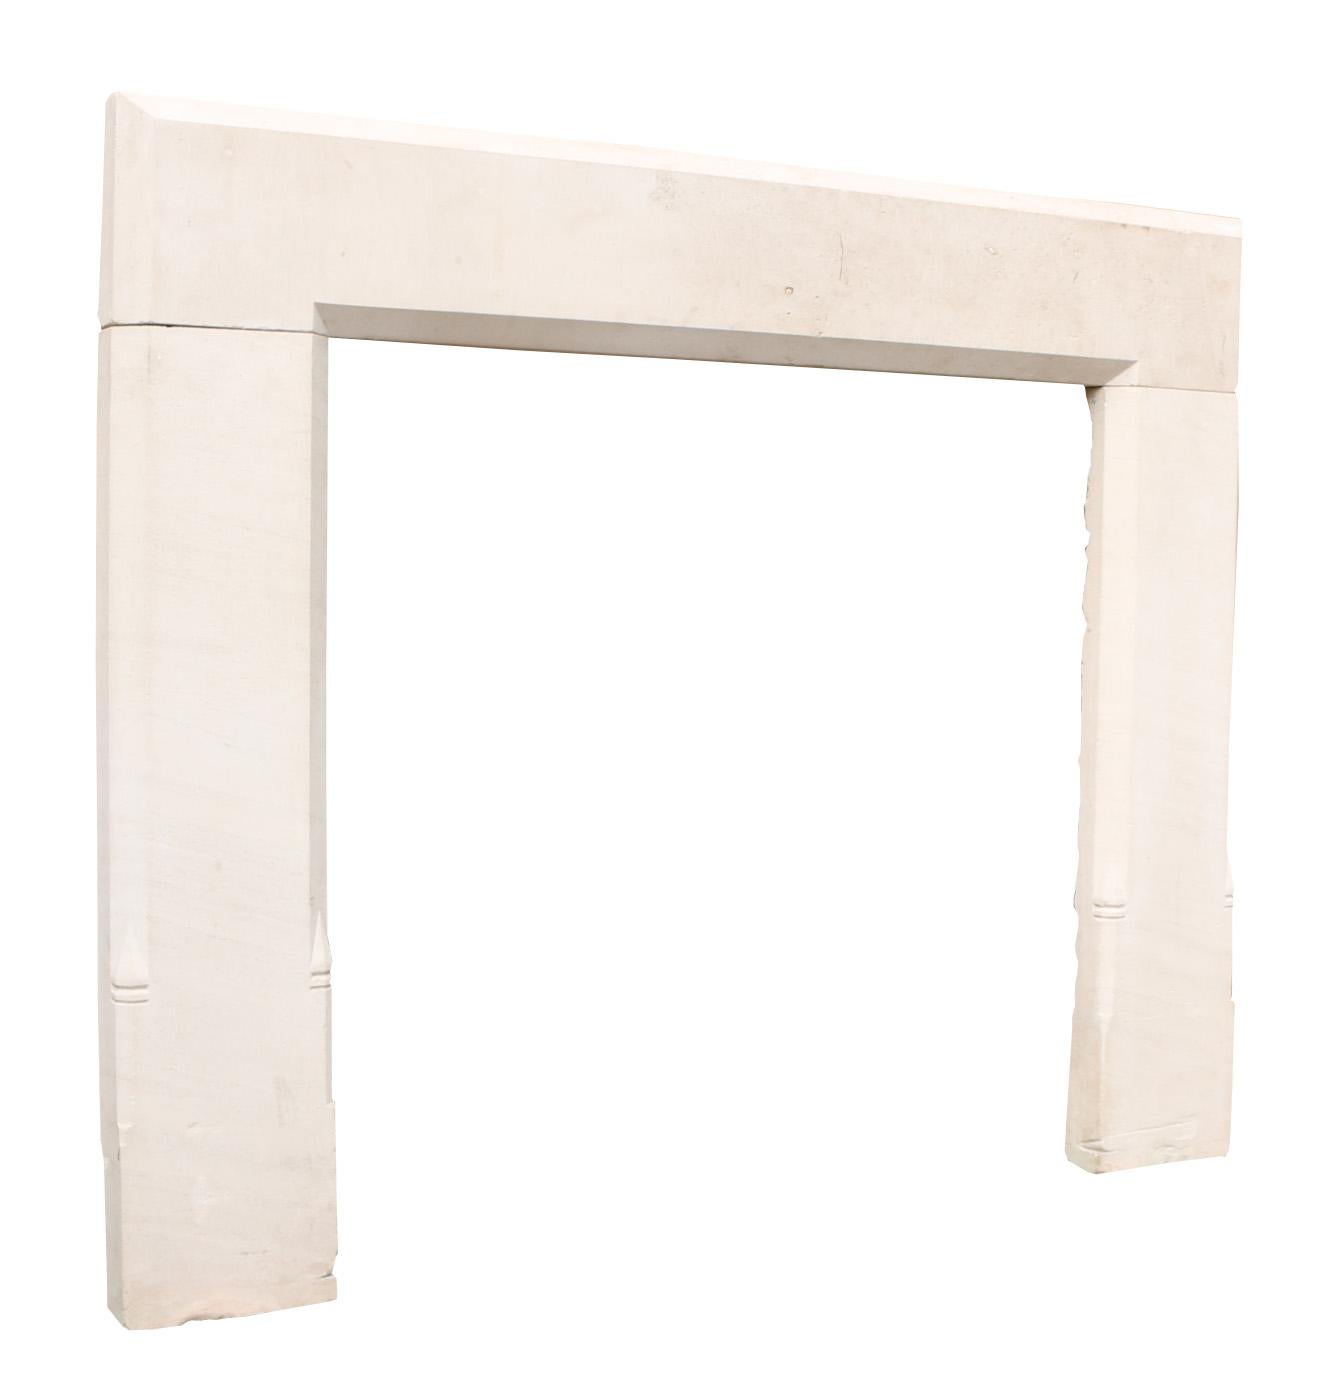 Antique Portland Stone Fire Mantel In Fair Condition For Sale In Wormelow, Herefordshire